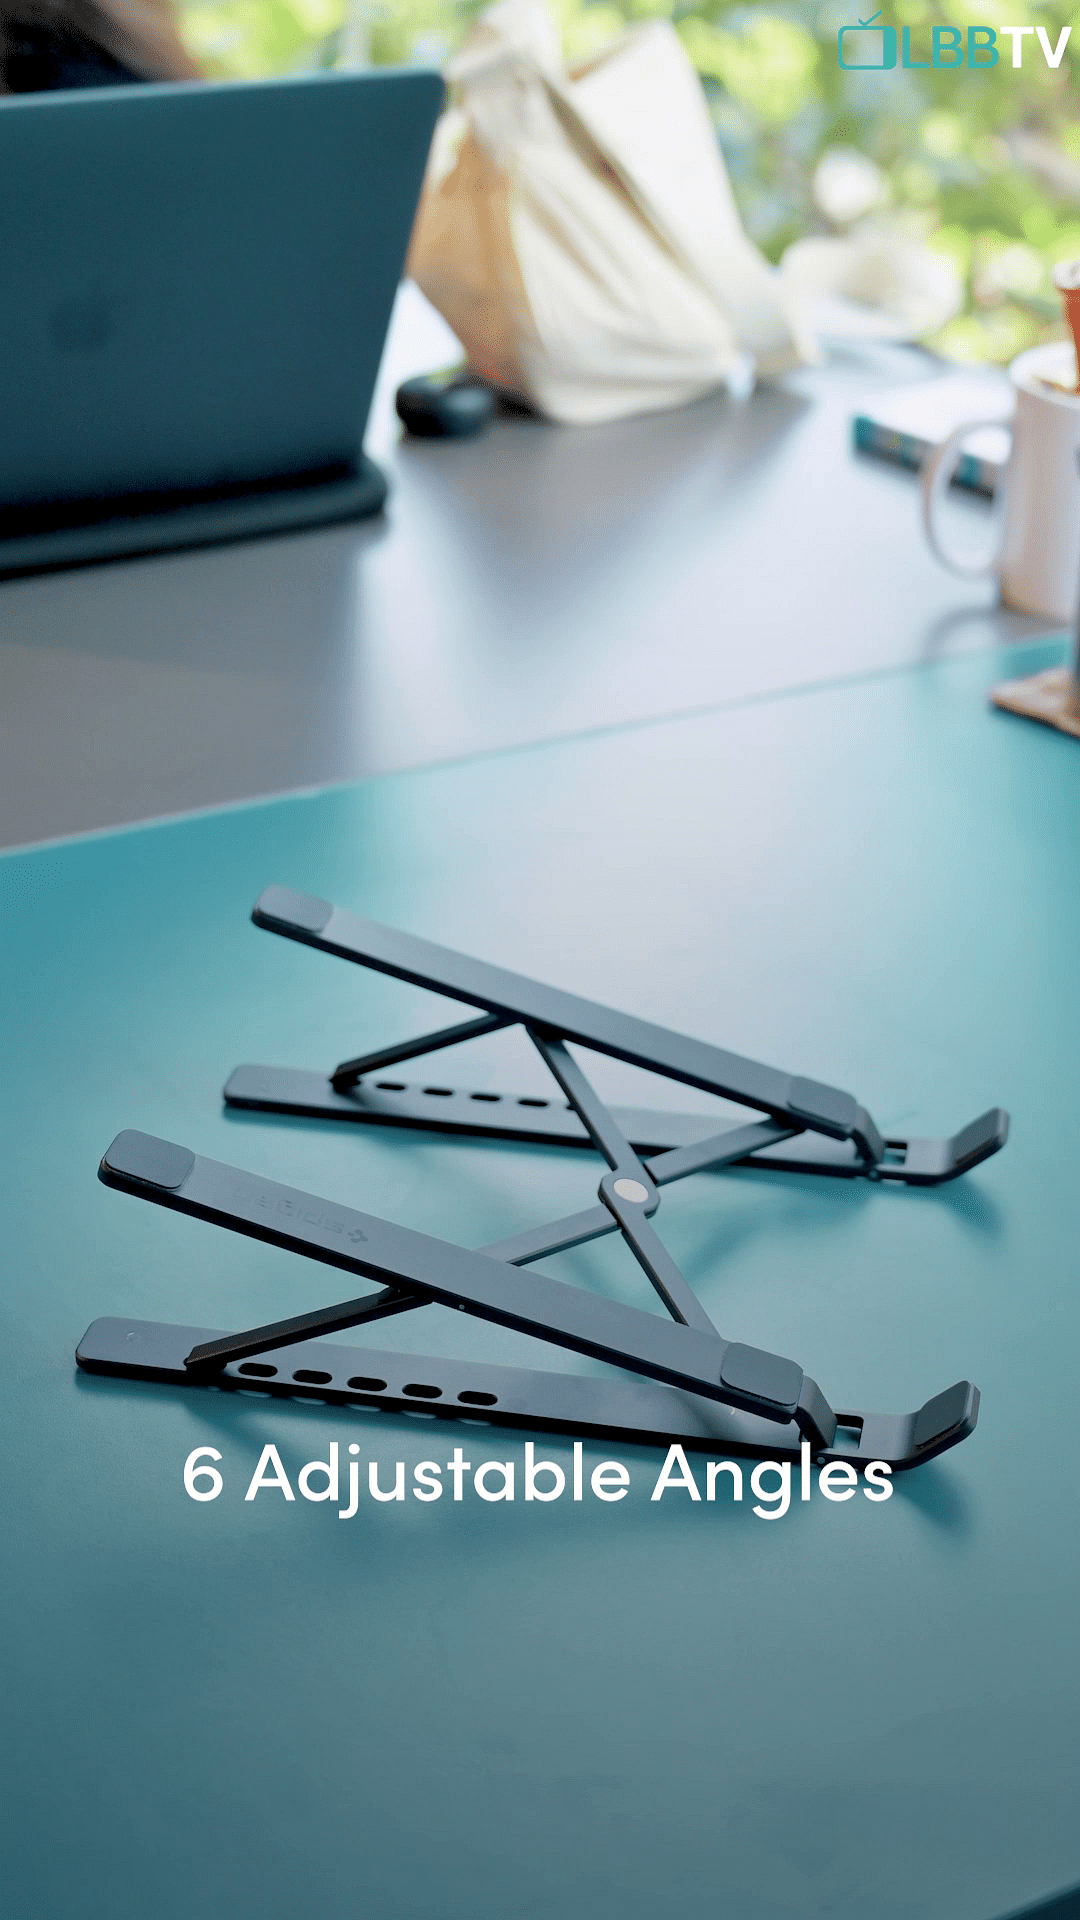 Glasses,Automotive design,Table,Eyewear,Laptop,Font,Wood,Electric blue,Triangle,Musical instrument accessory